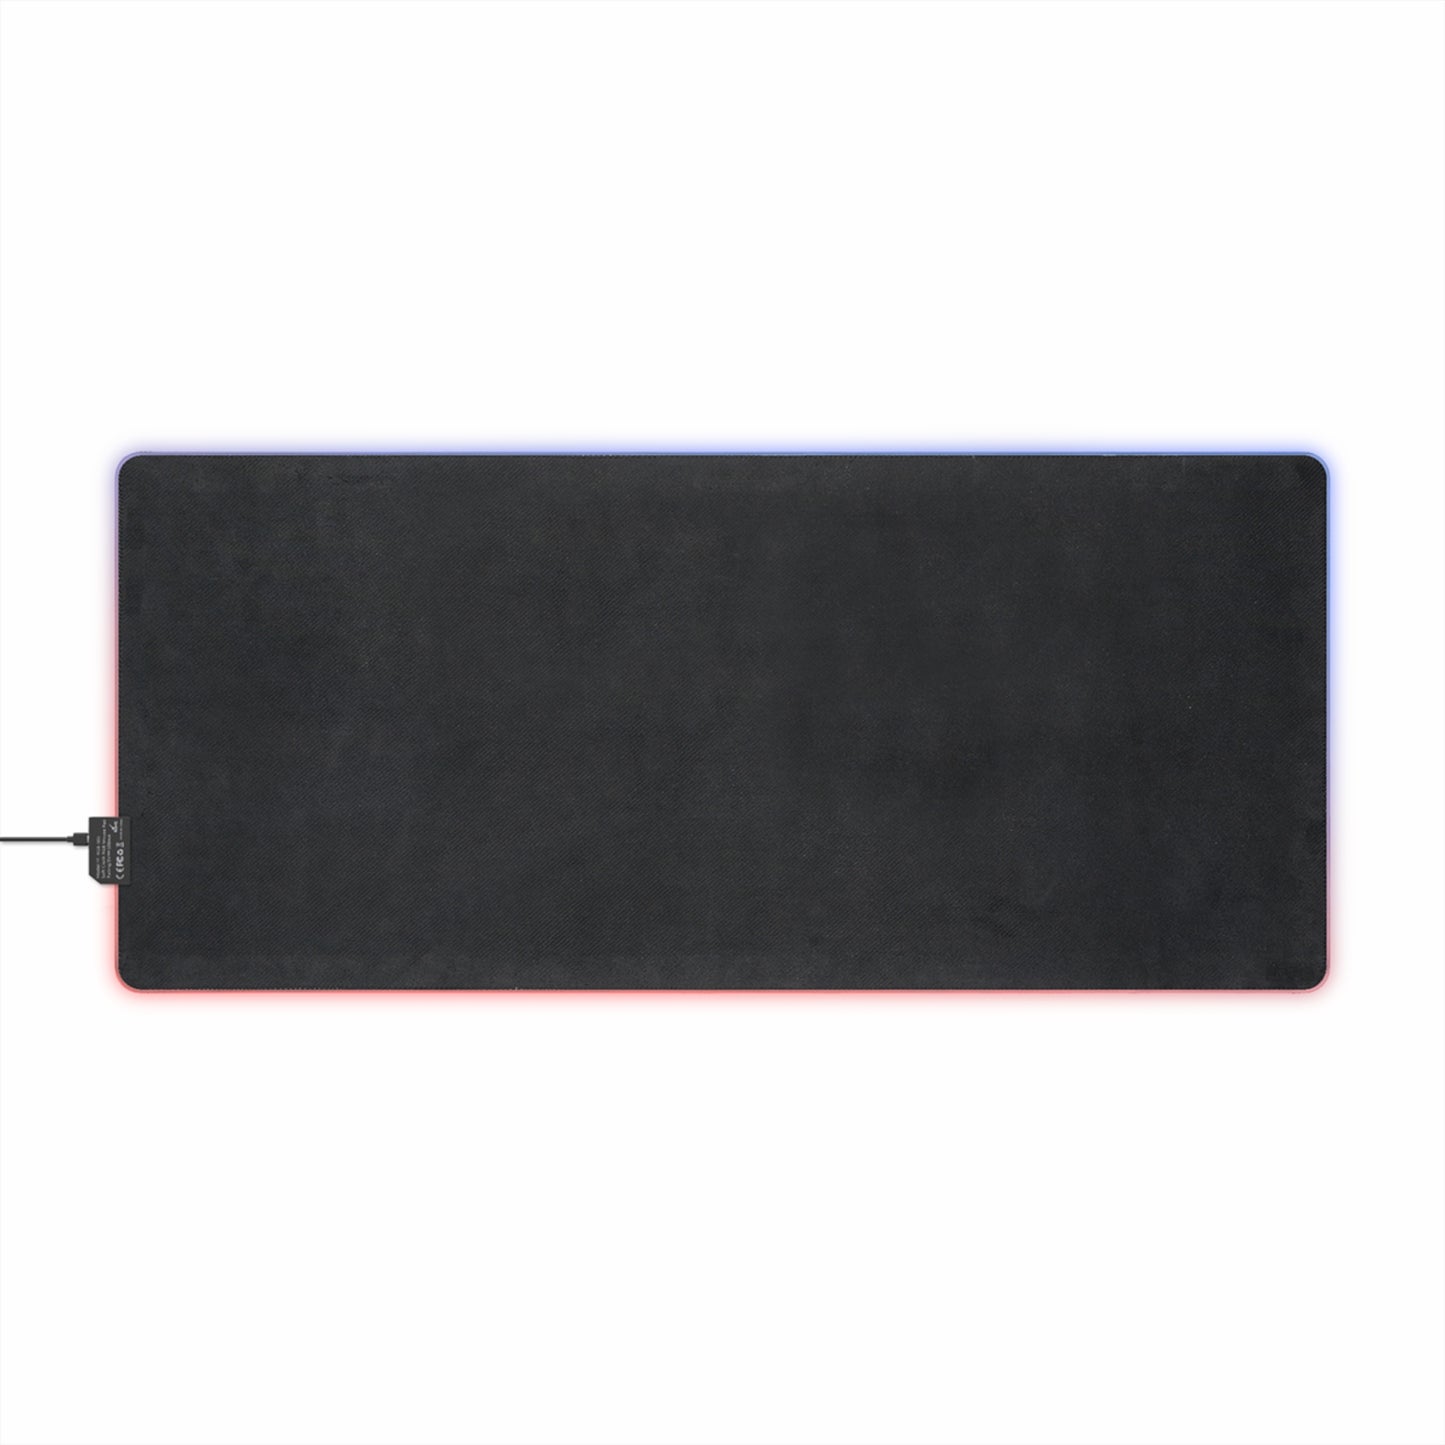 LED Gaming Mouse Pad (Spray Paint Black)